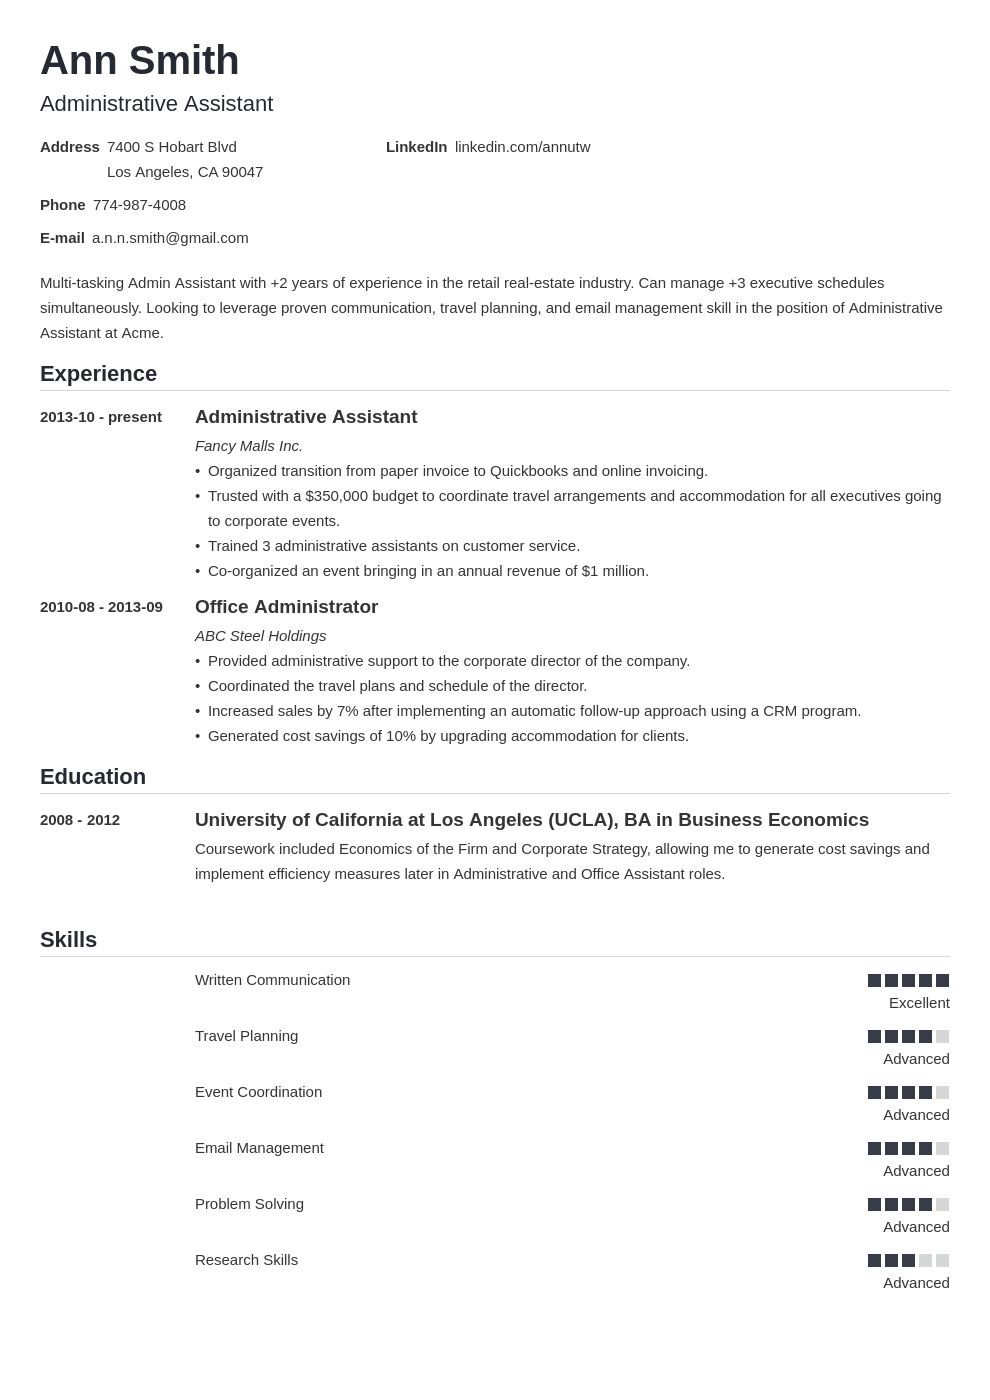 Administrative Assistant Resume Template from cdn-images.zety.com